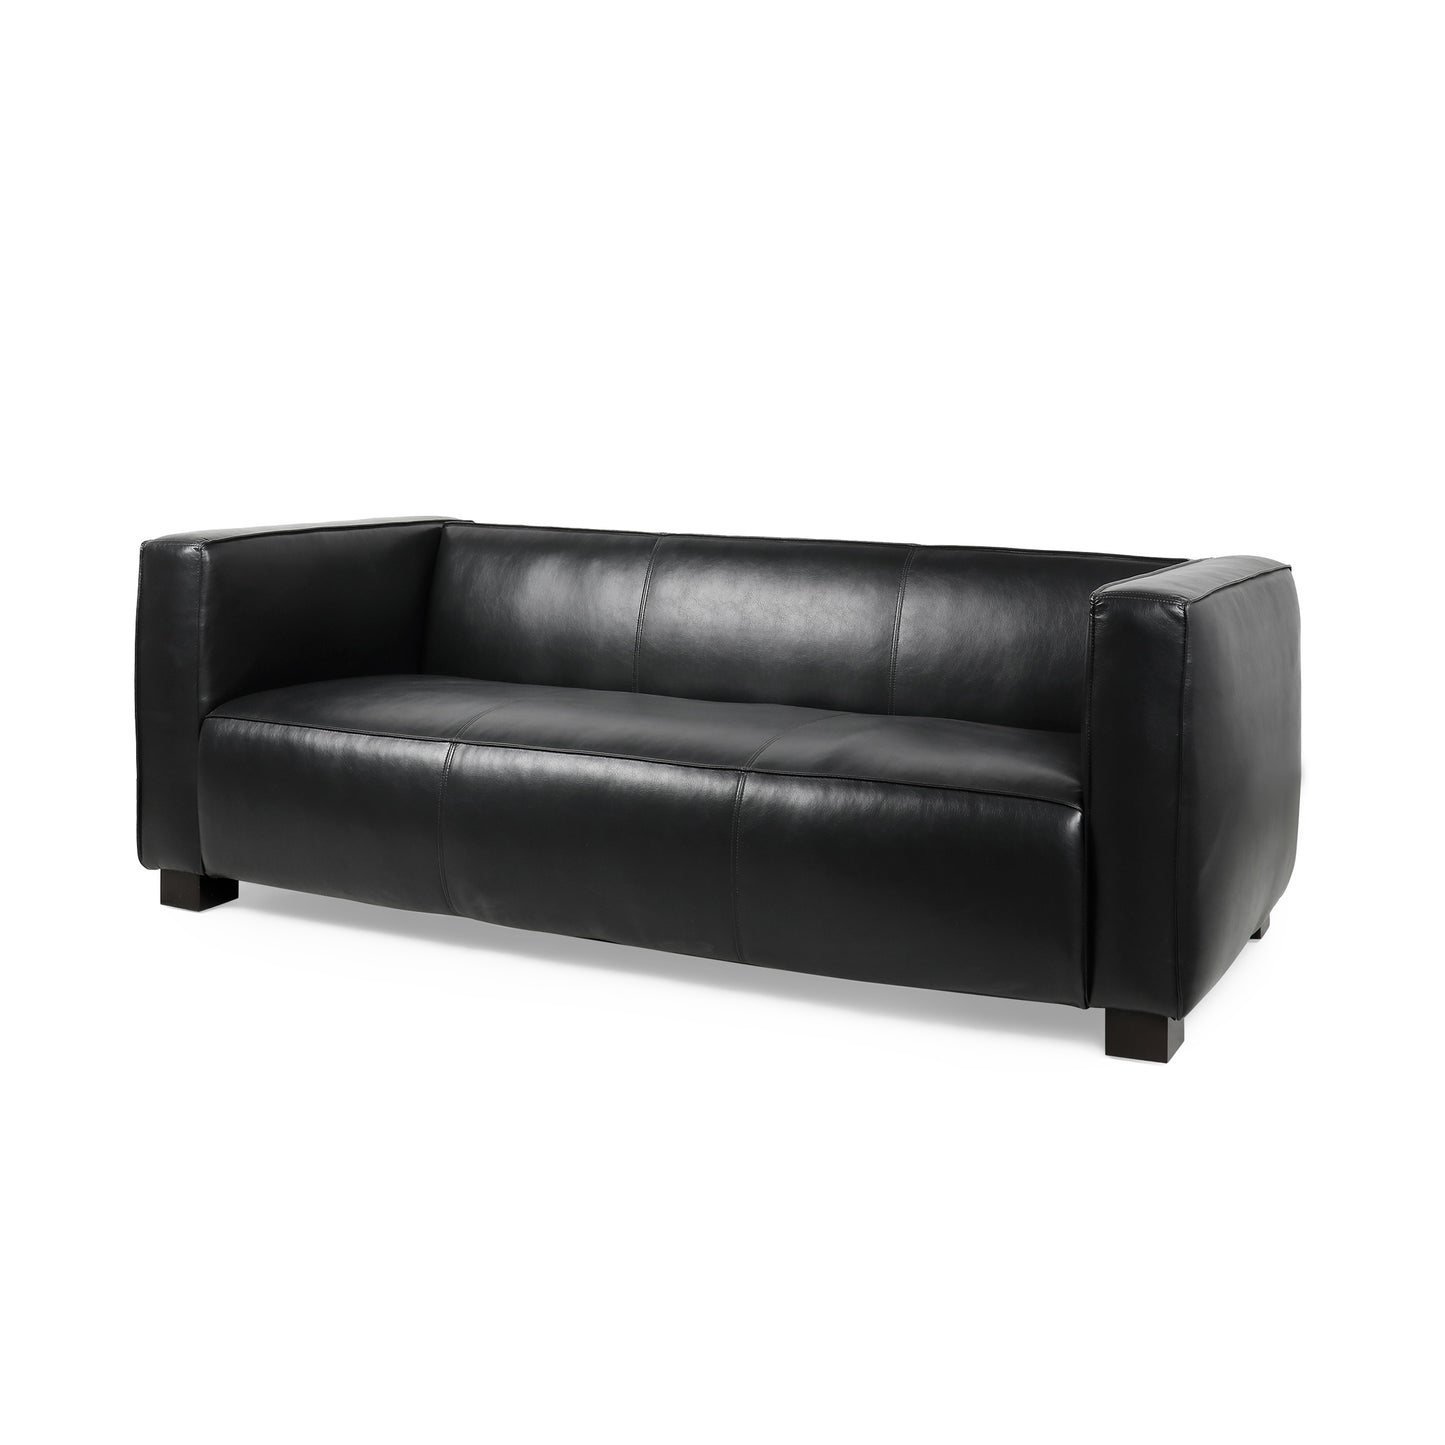 Minkler Contemporary Faux Leather 3 Seater Sofa